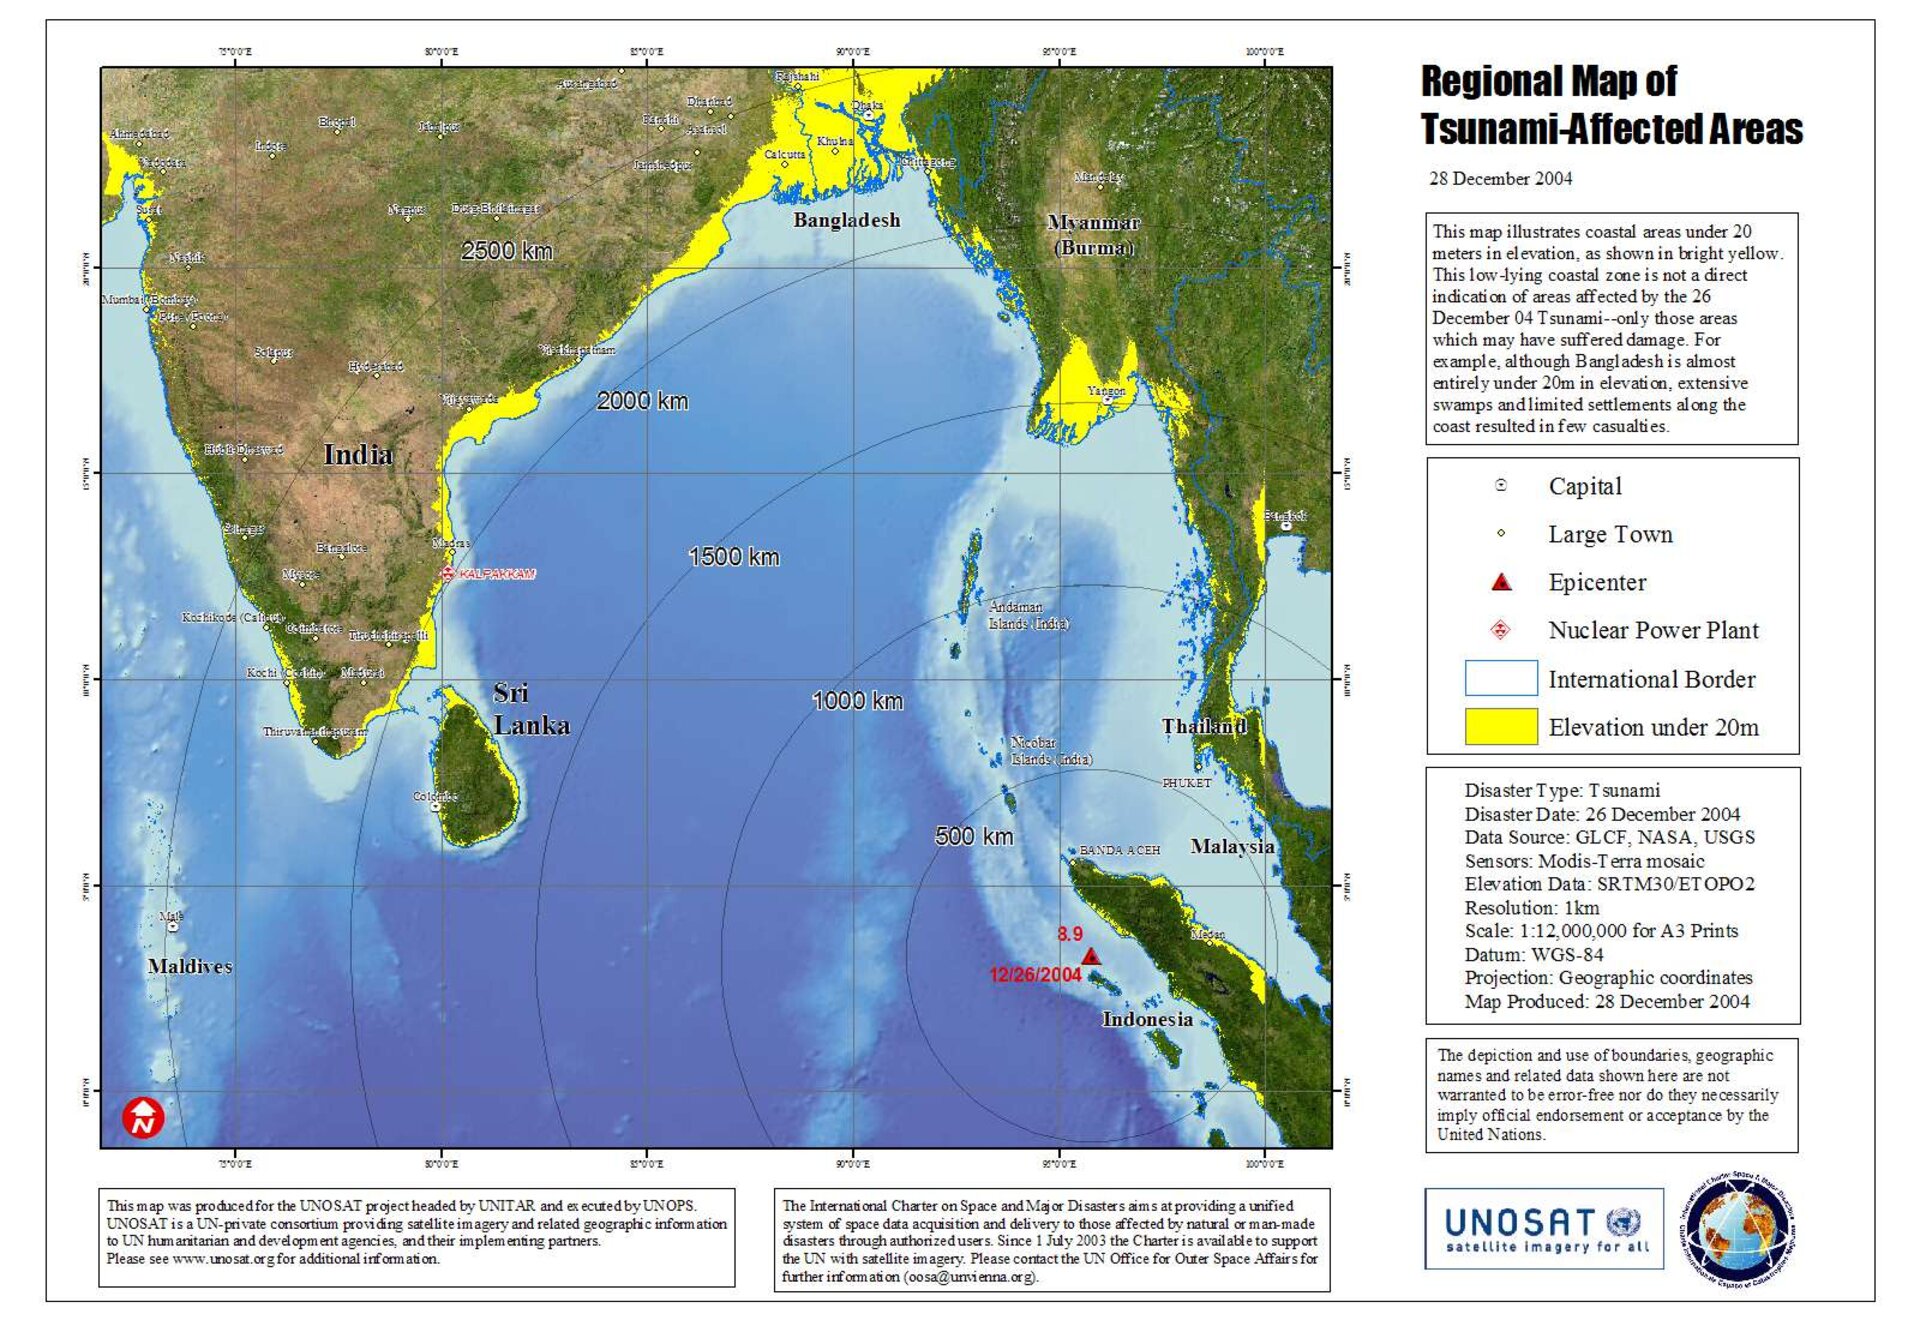 Regional map of tsunami-affected areas